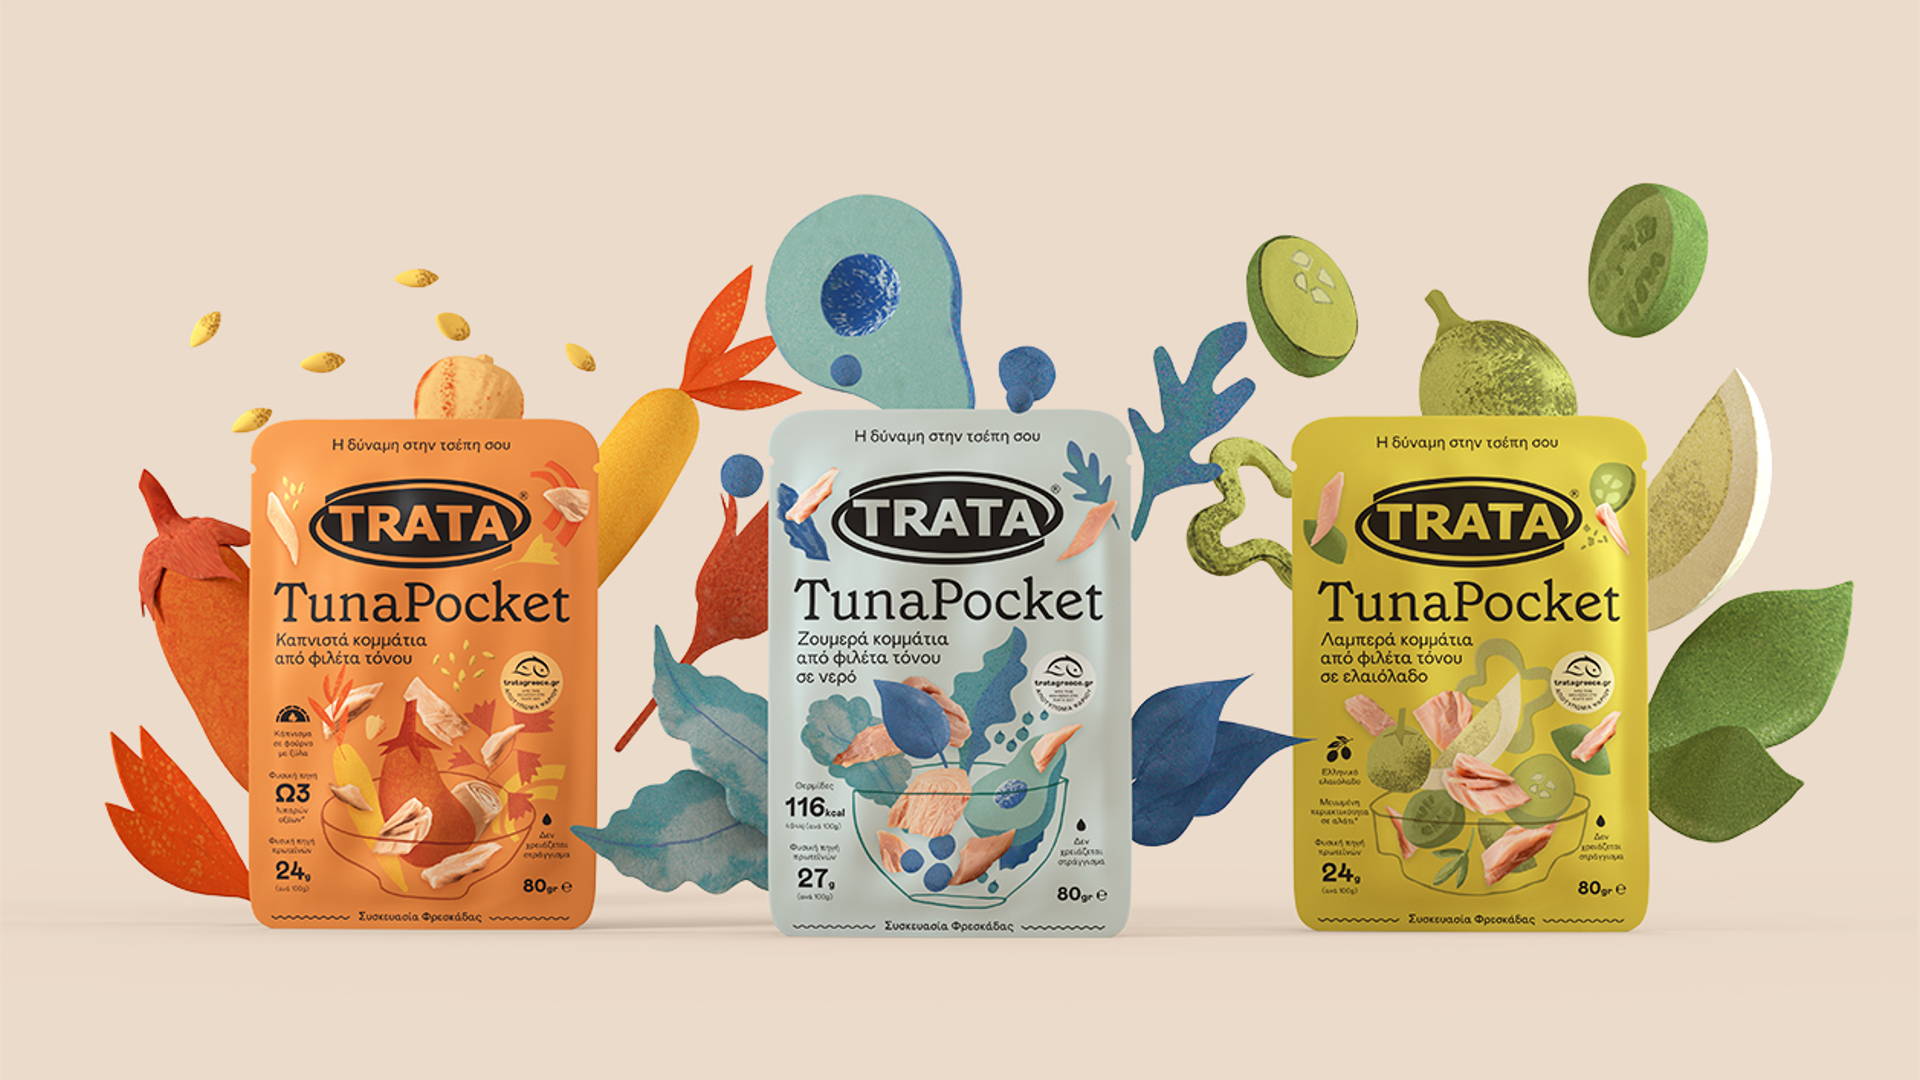 Featured image for Trata Tuna Rethinks Canned Fish Packaging Through A Colorful Approach